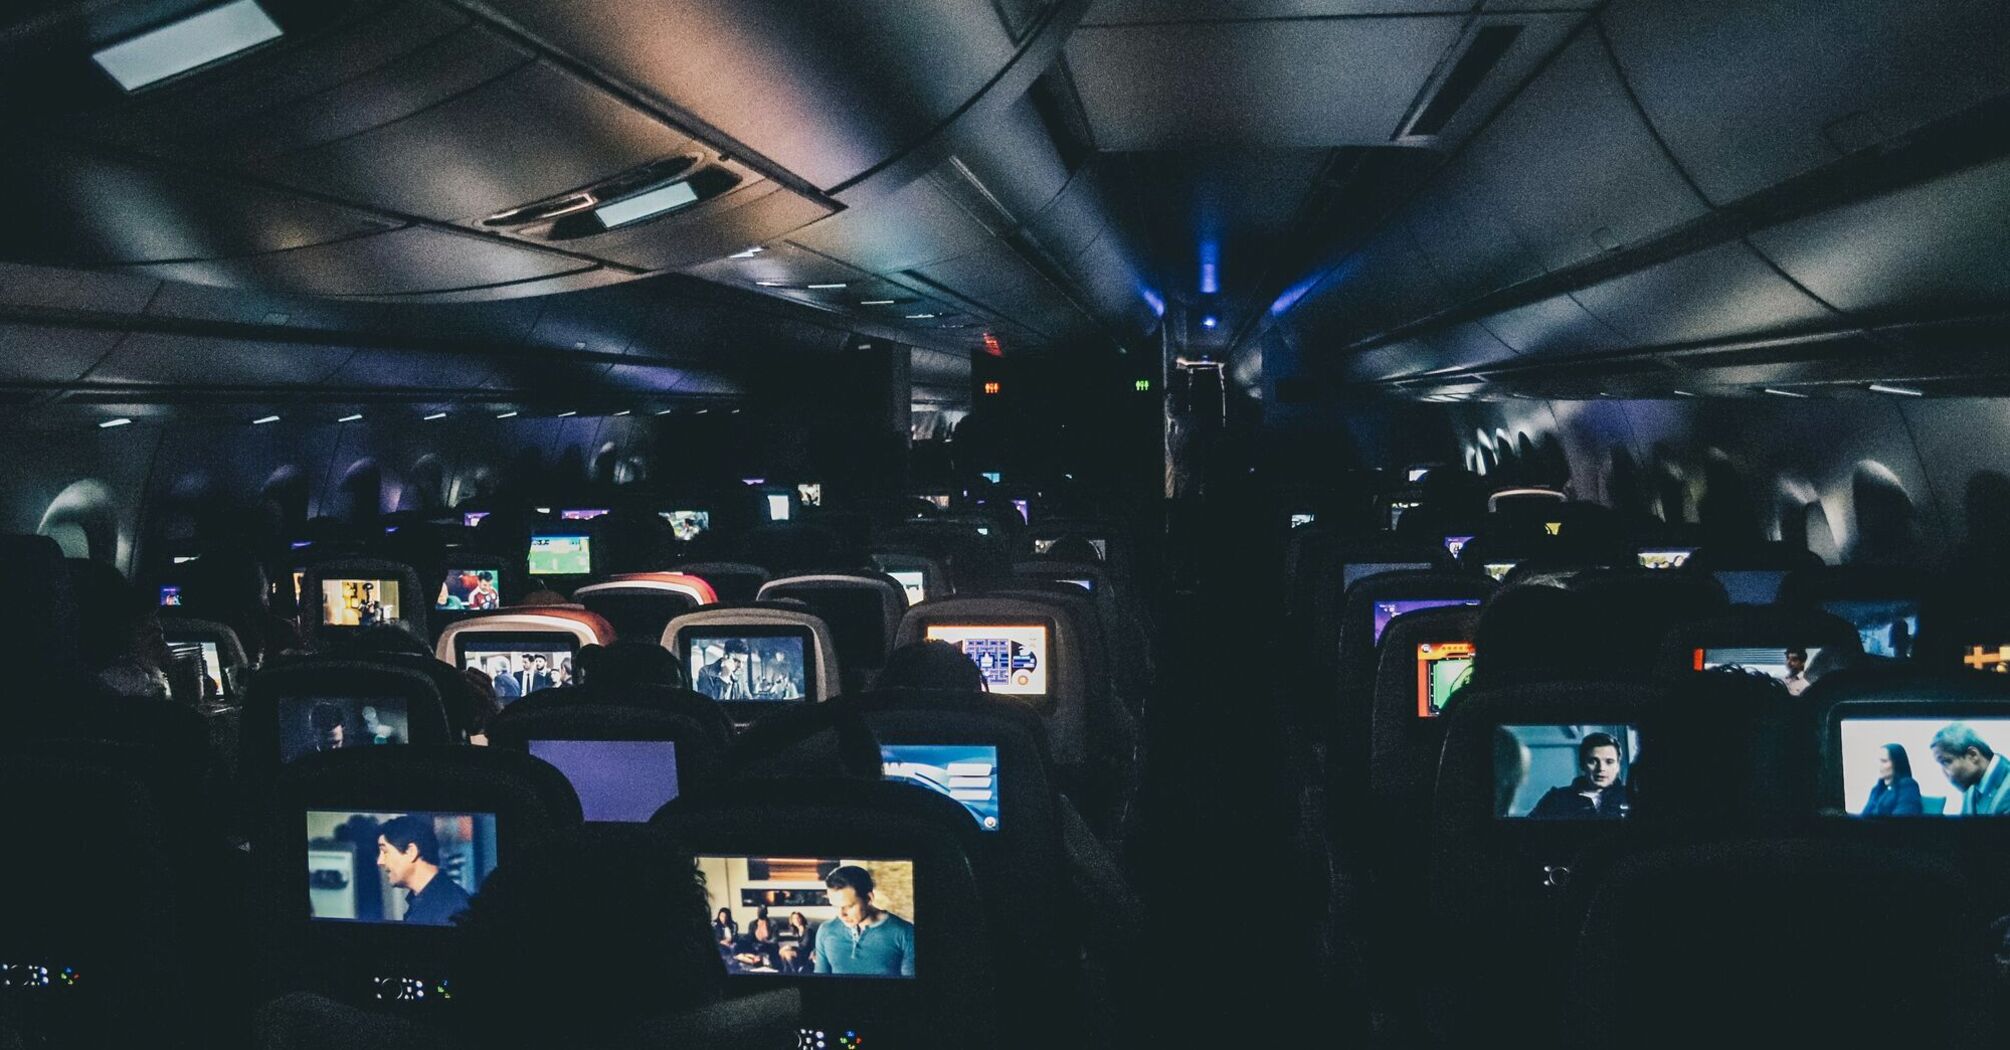 The interior of an airplane cabin with rows of seats, each with personal entertainment screens displaying various movies